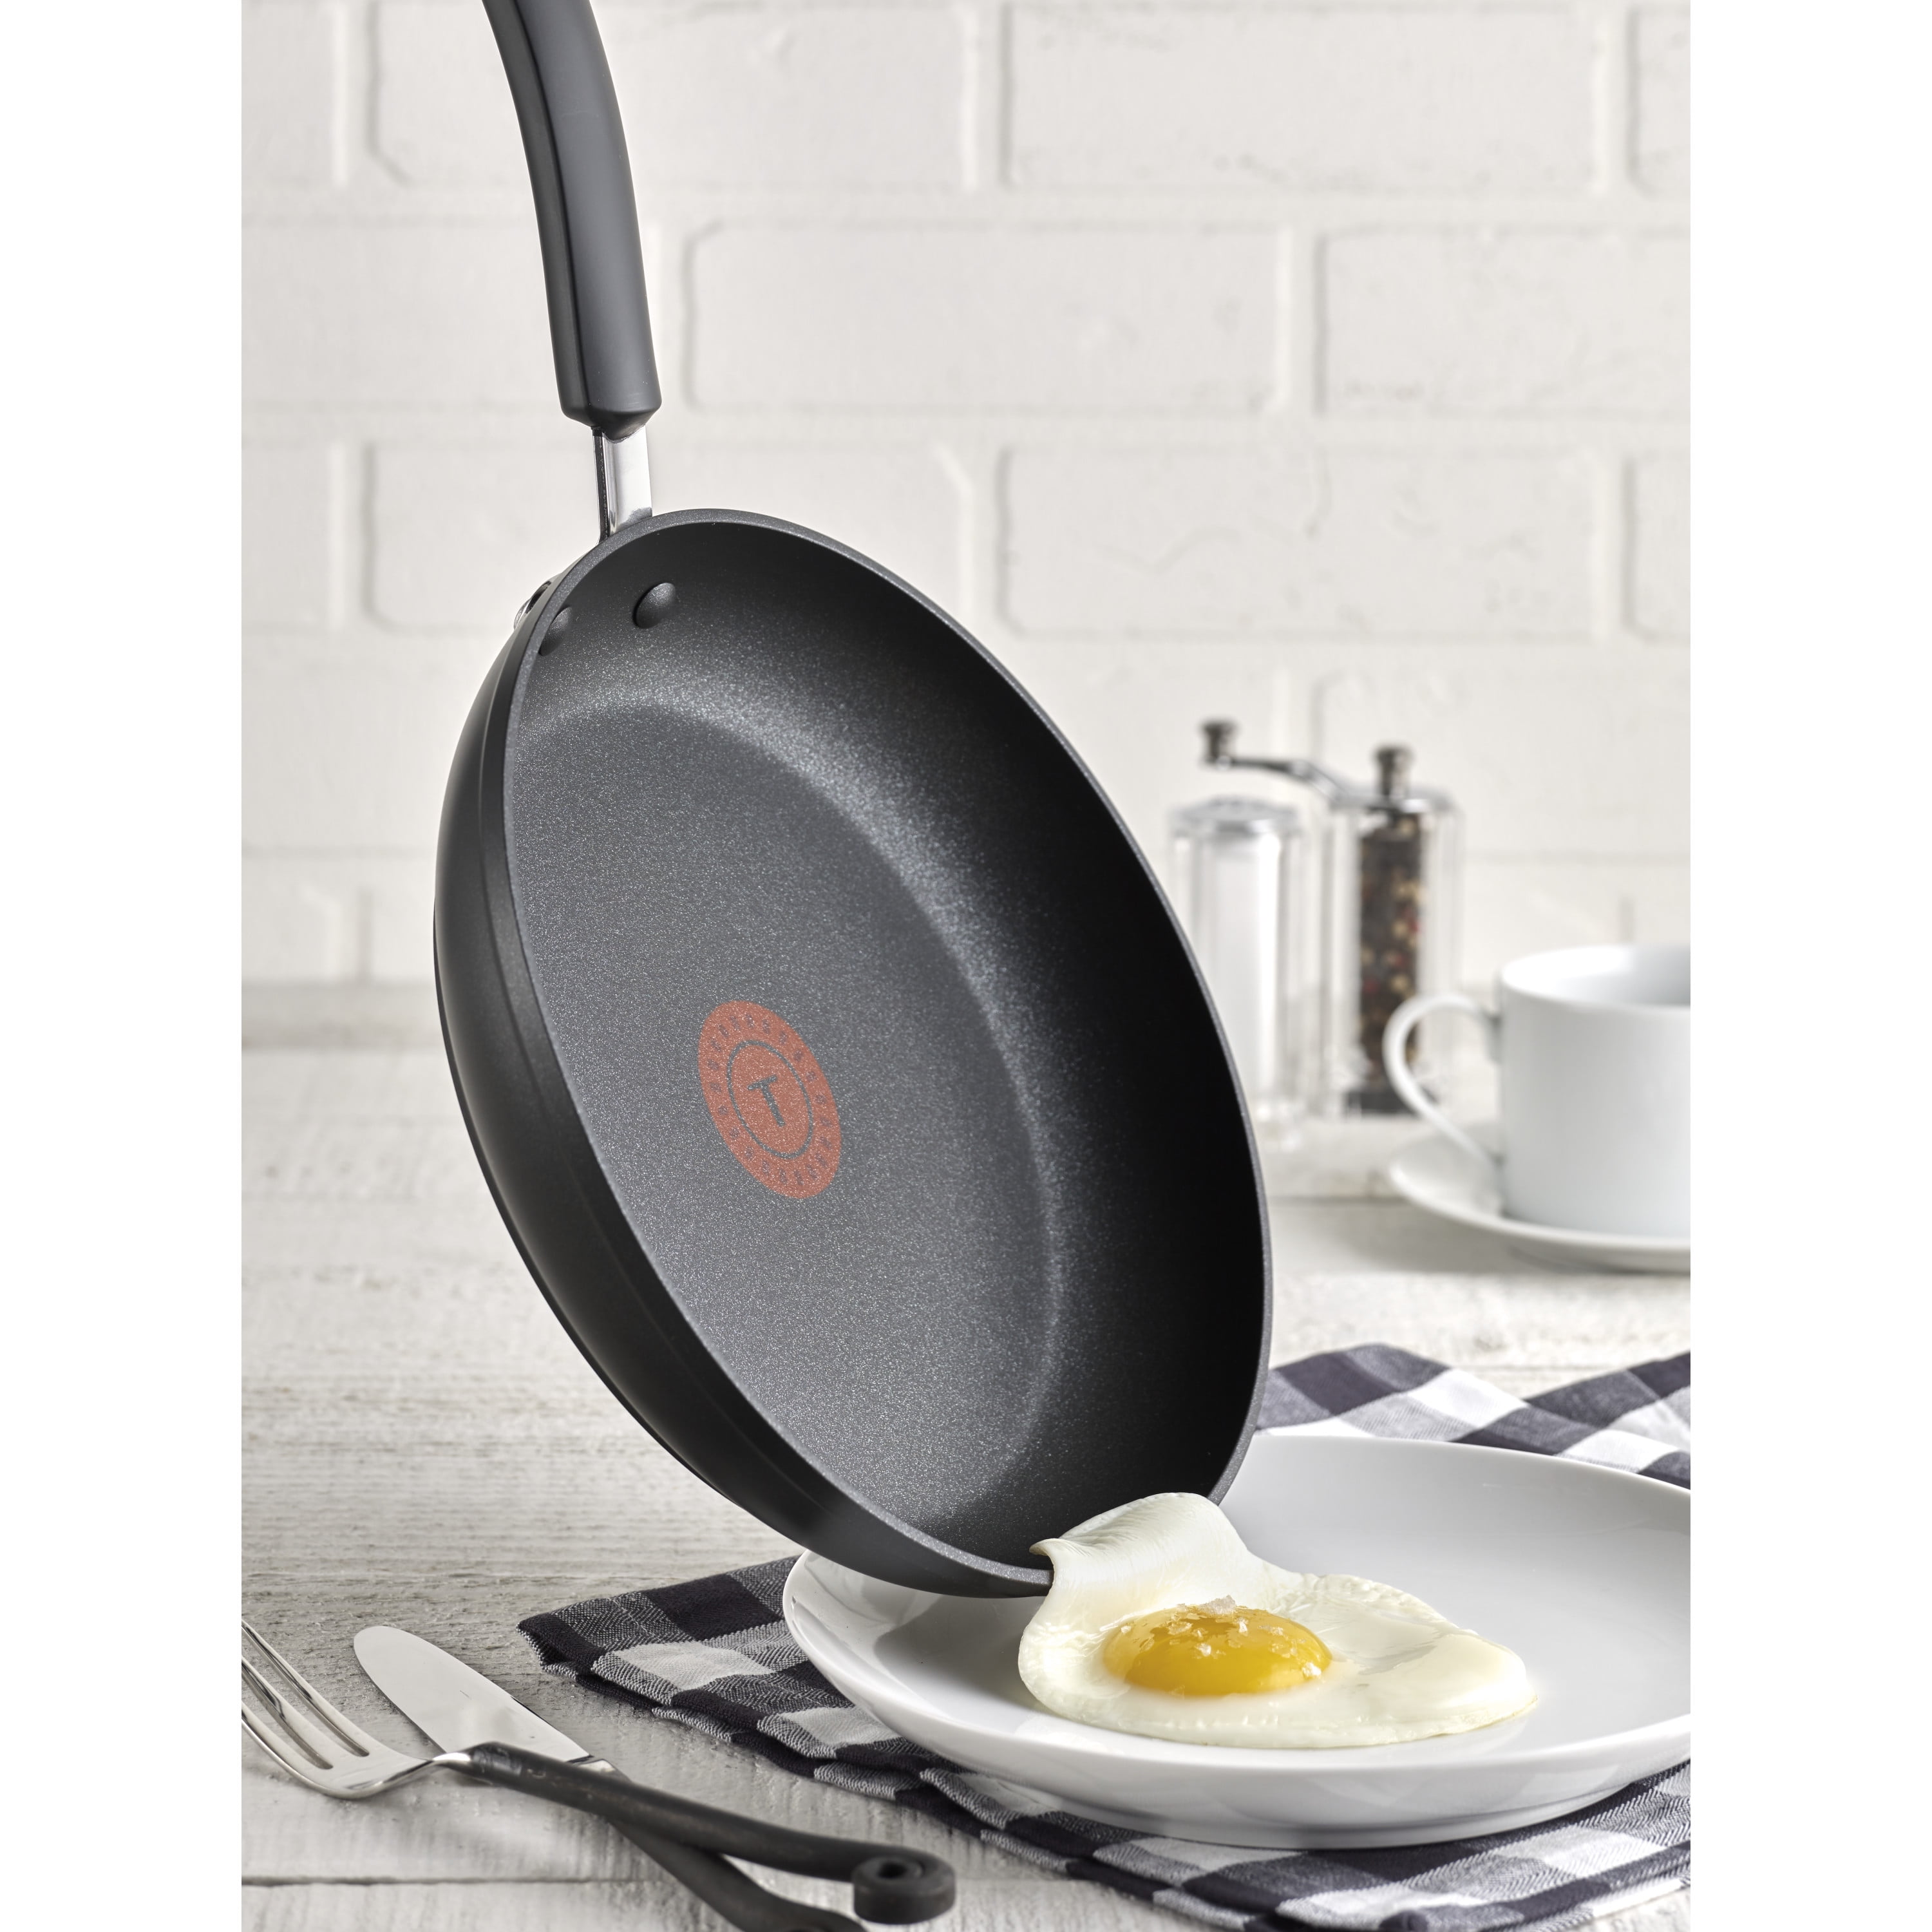 T-Fal Excite Non-Stick Turquoise 8 and 10.25 Inch Fry Pan Set